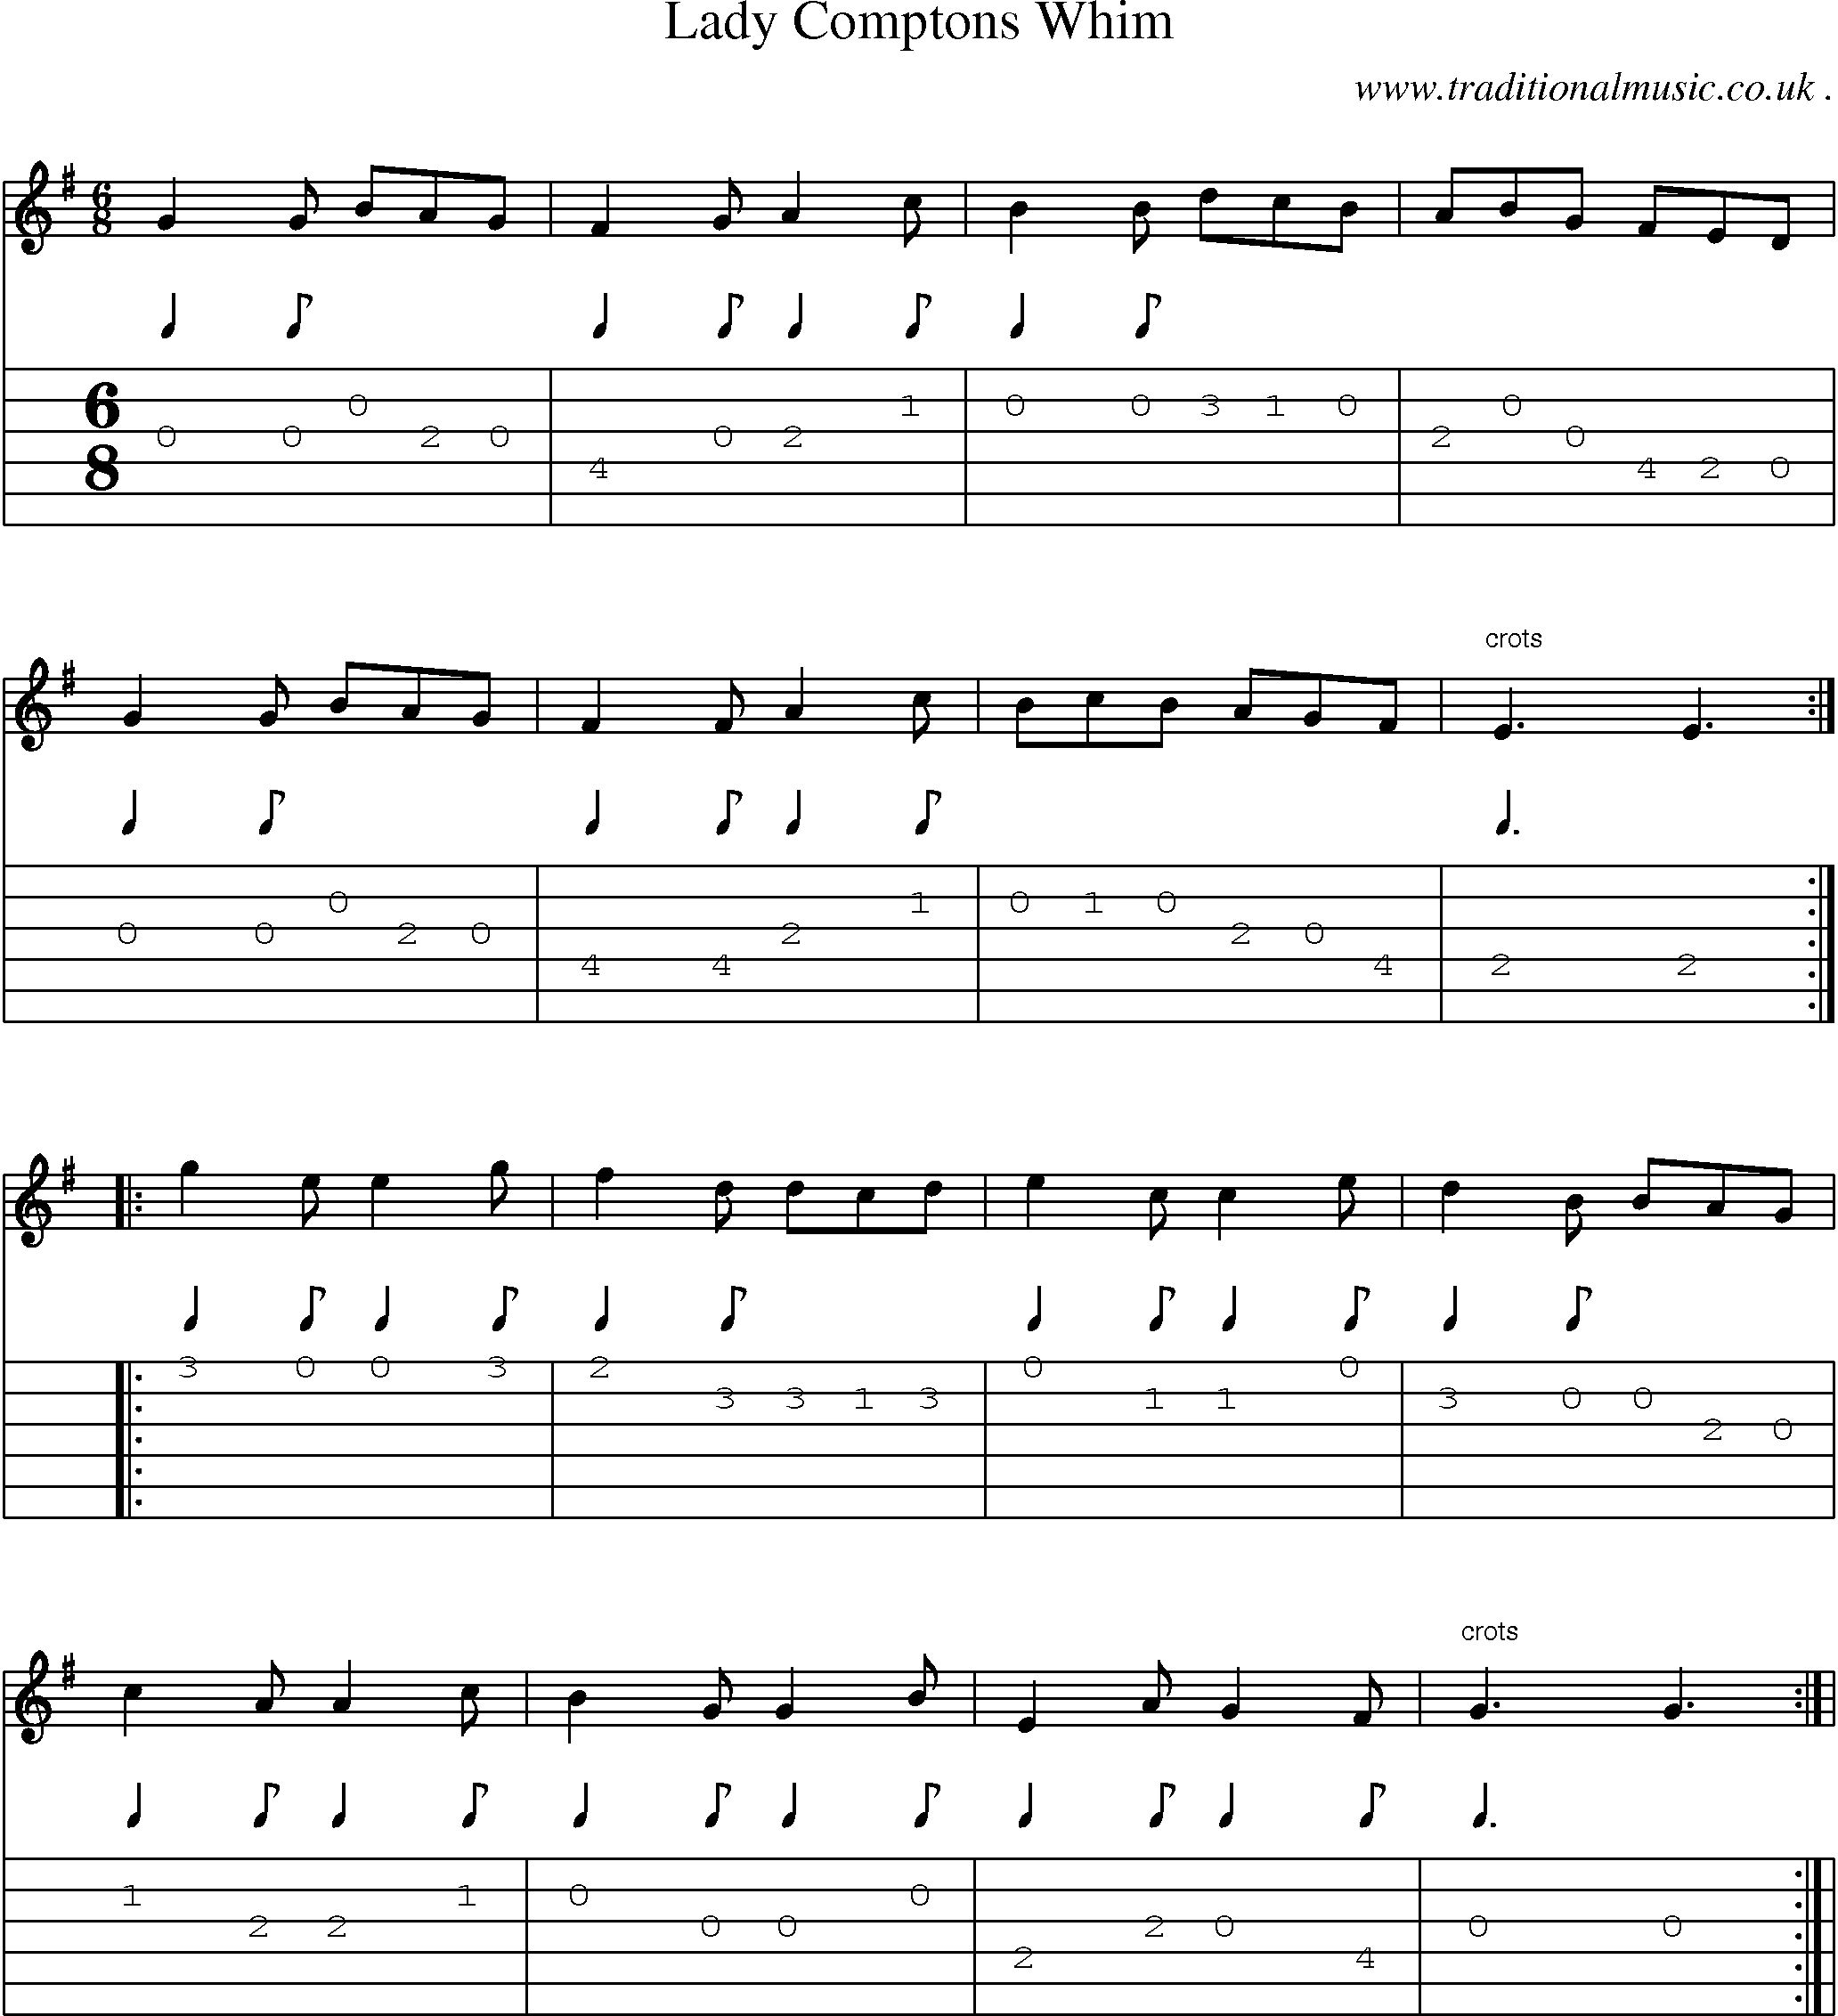 Sheet-Music and Guitar Tabs for Lady Comptons Whim